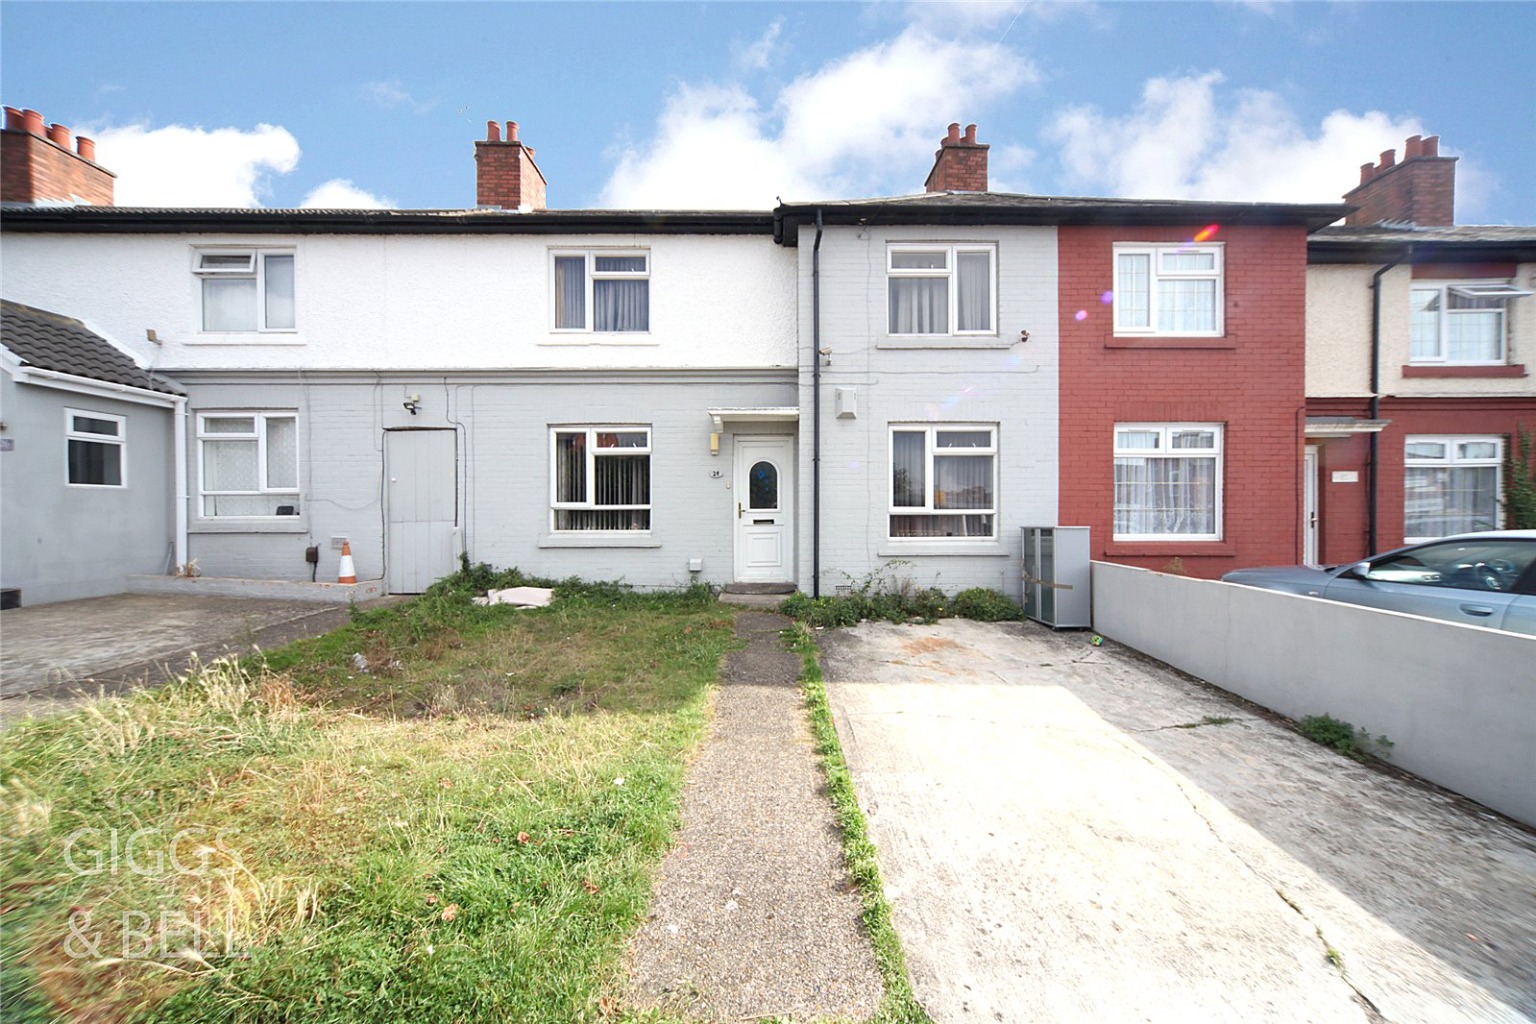 3 bed terraced house for sale in Denbigh Road, Luton 0